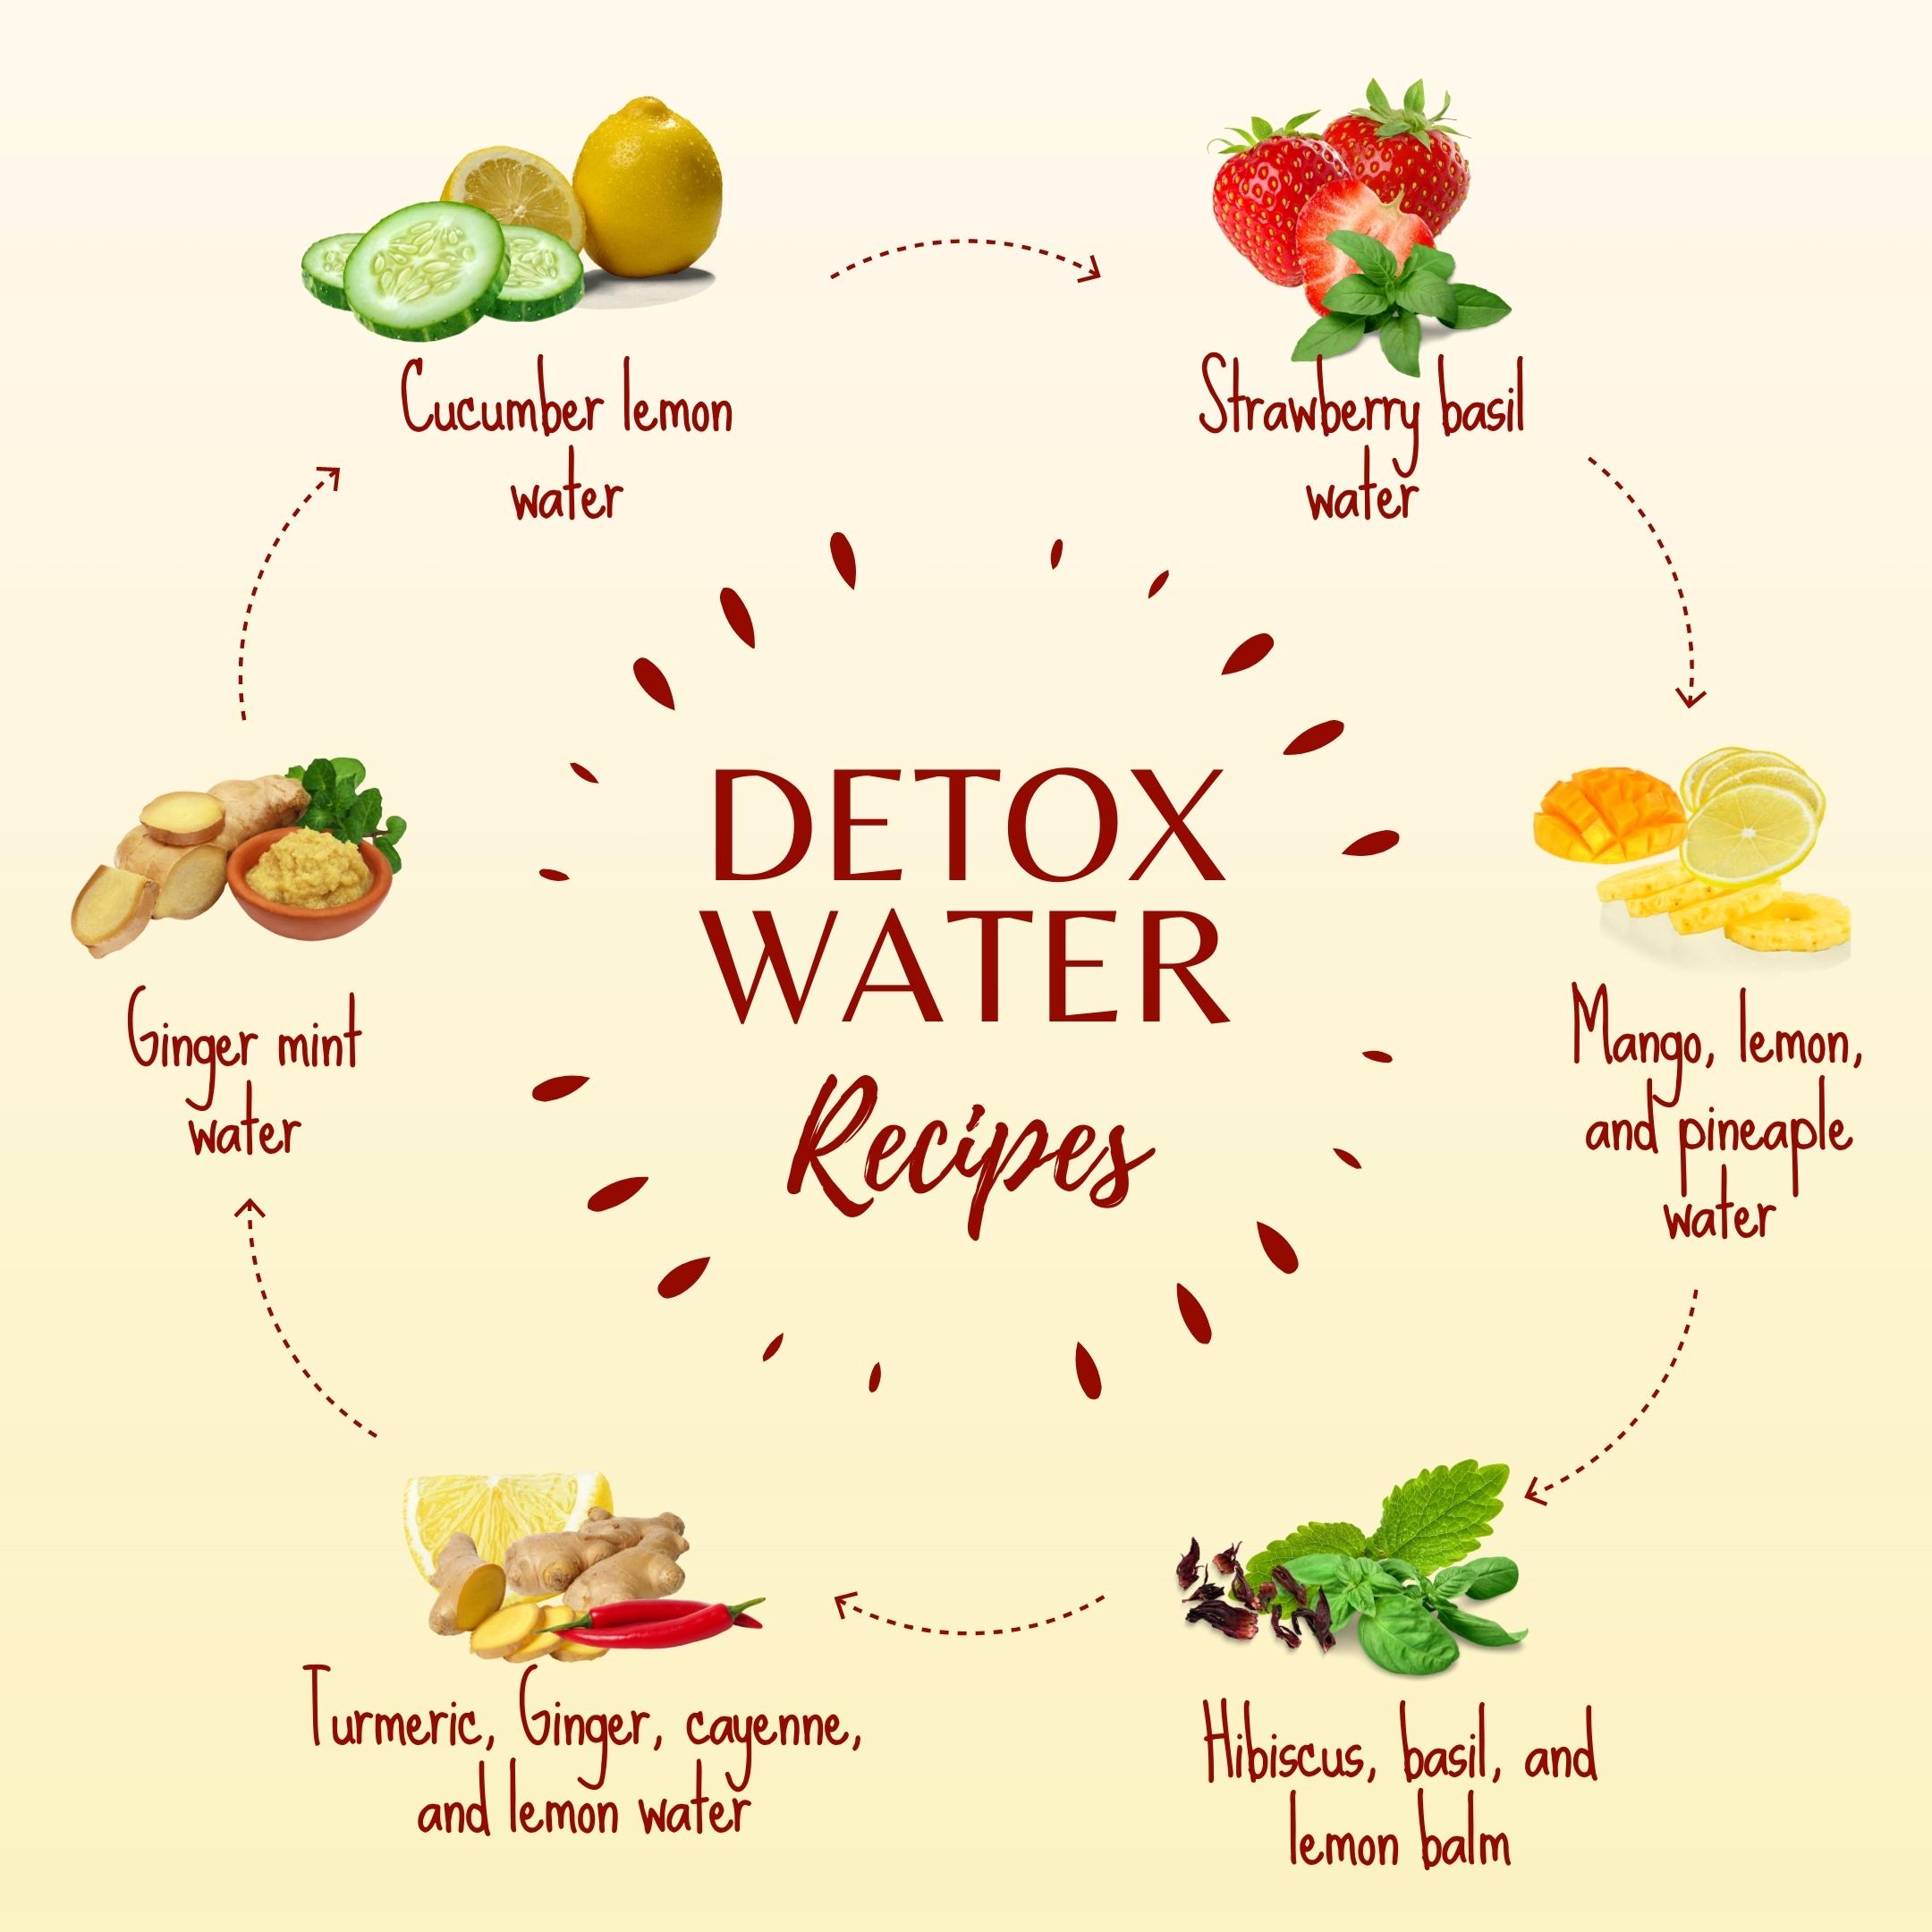 Detox Water Recipes to Help Cut the Bloat